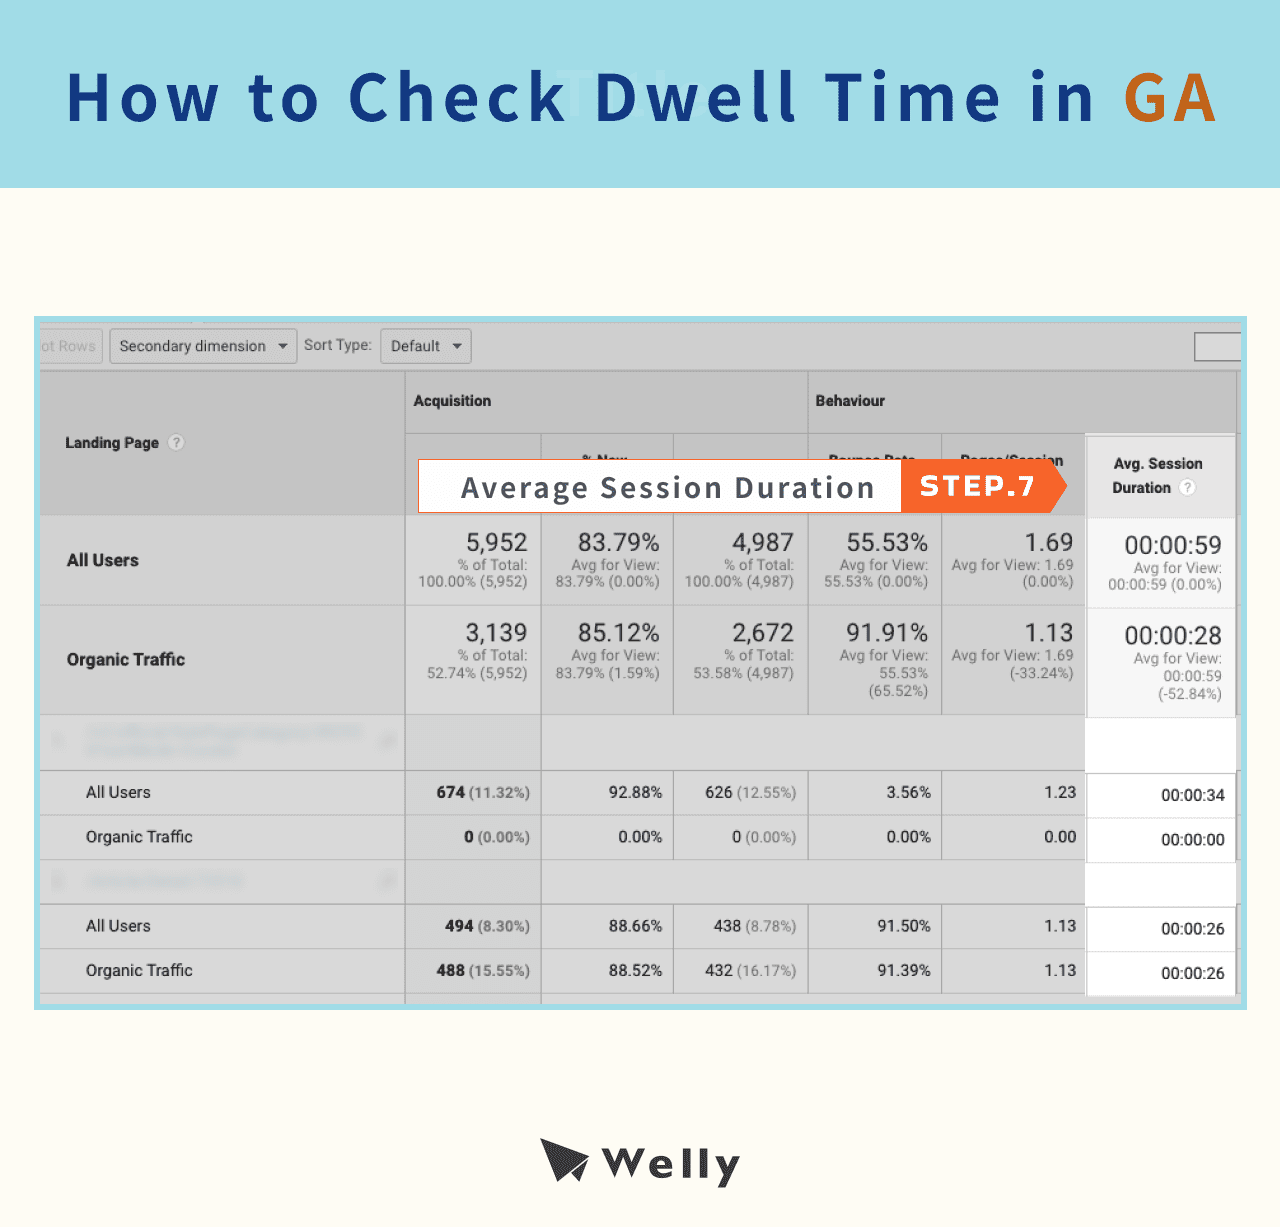 How to Check Dwell Time in GA